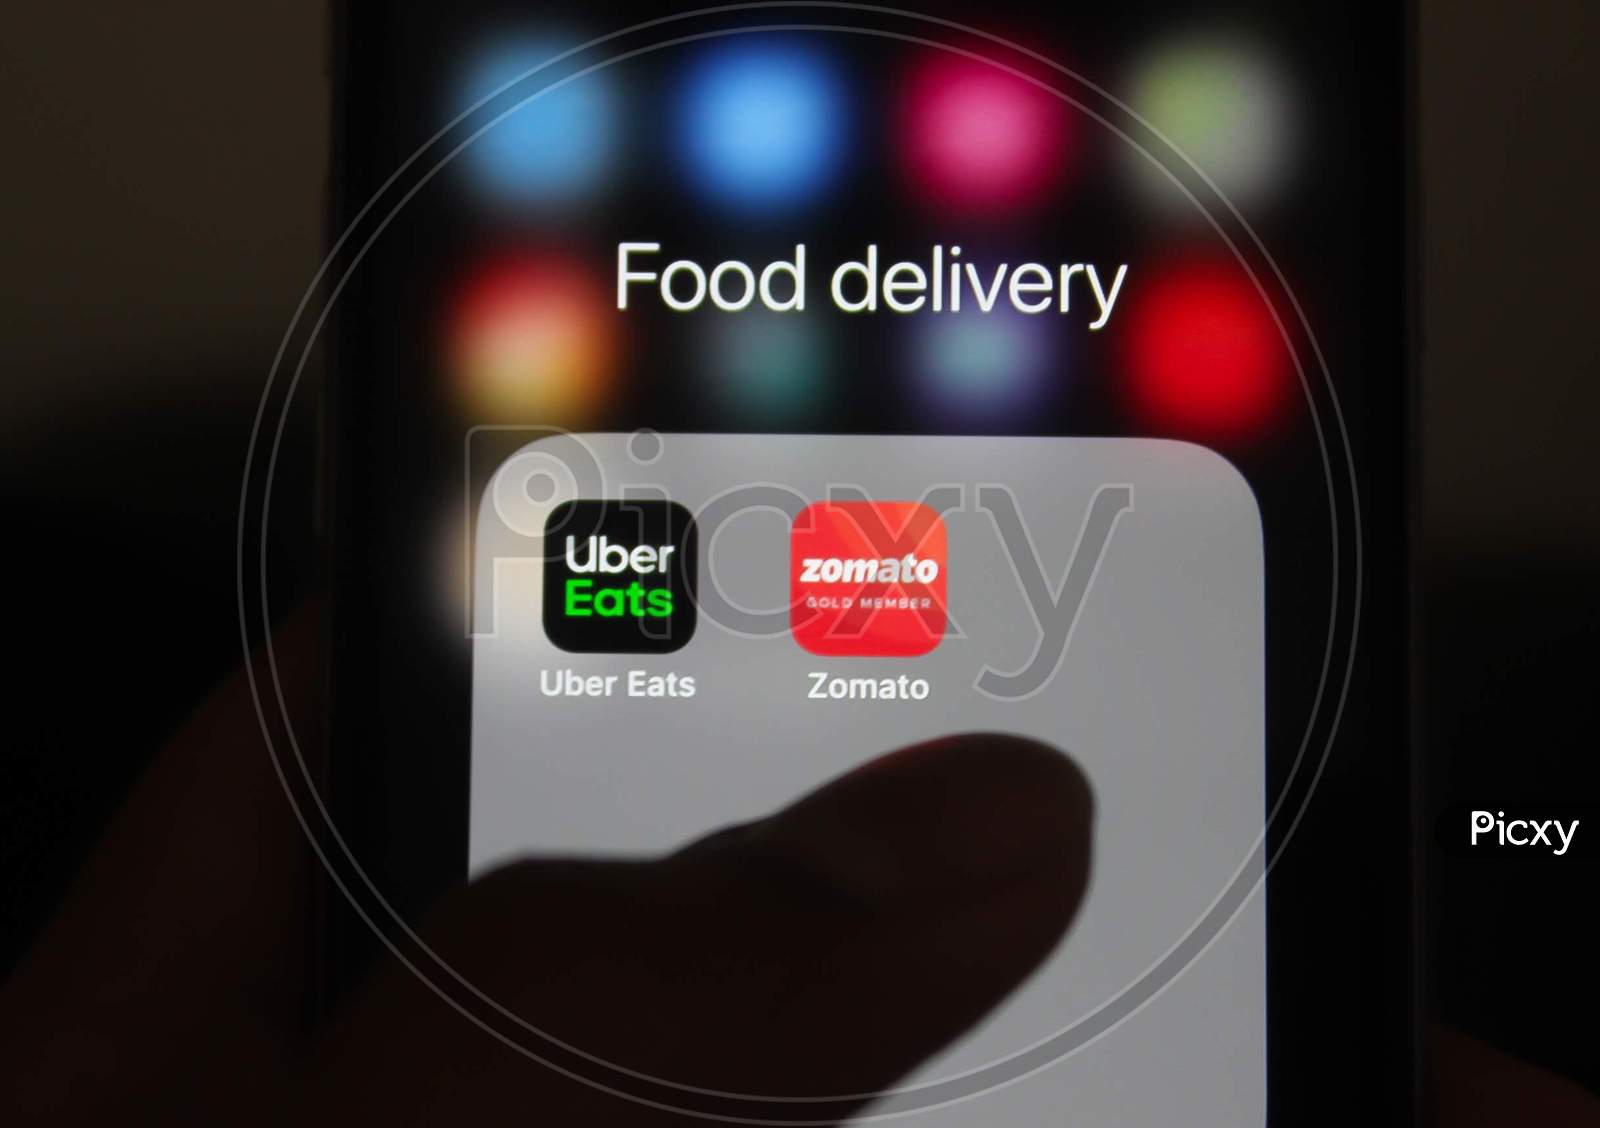 Uber eats & Zomato food delivery applications